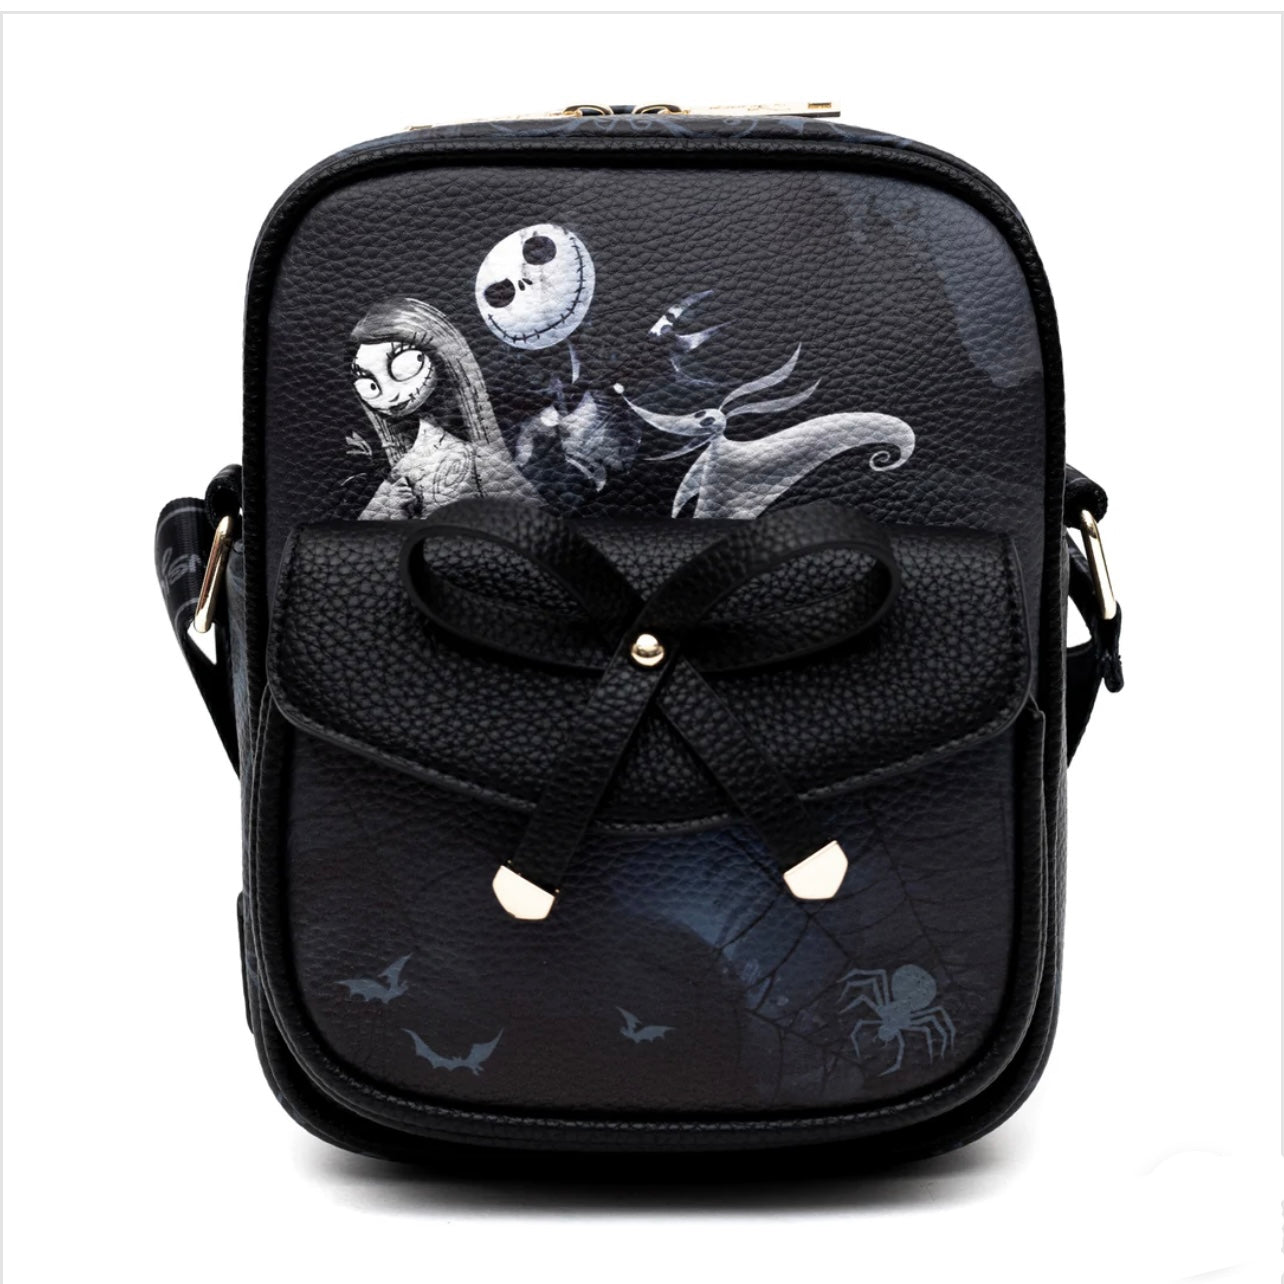 Luxe-The Nightmare before Christmas Cross Body